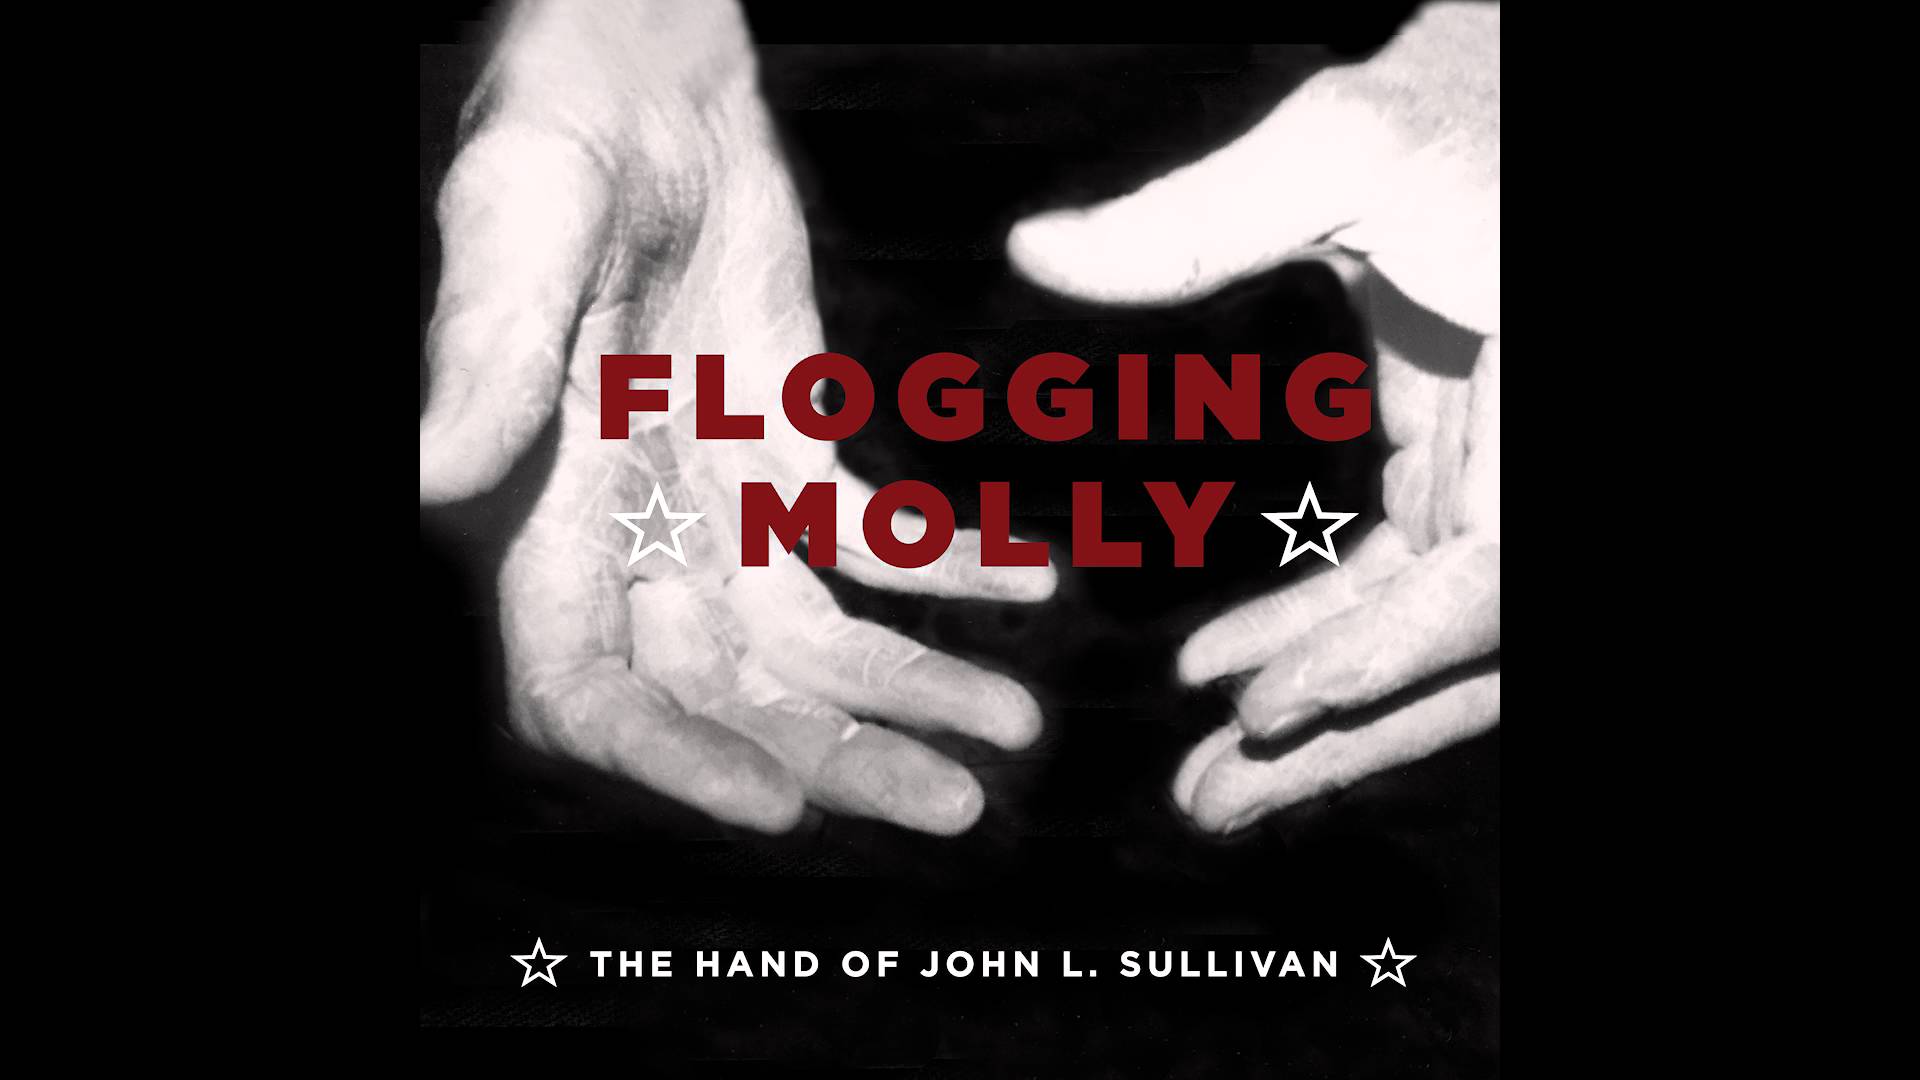 flogging molly discography torrent